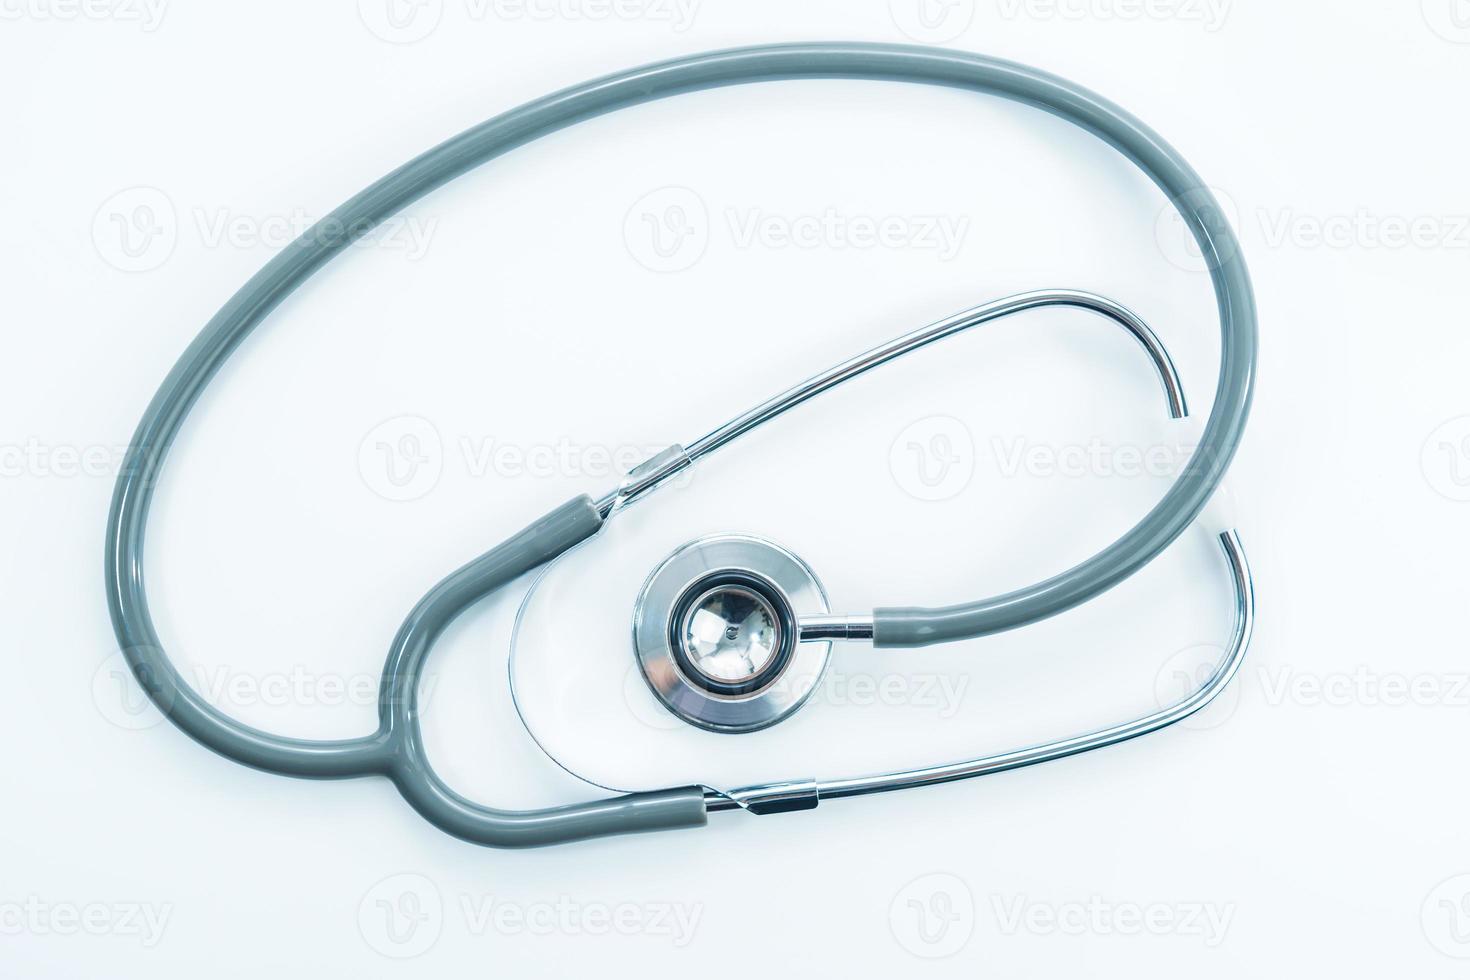 Stethoscope for doctor checkup on table photo